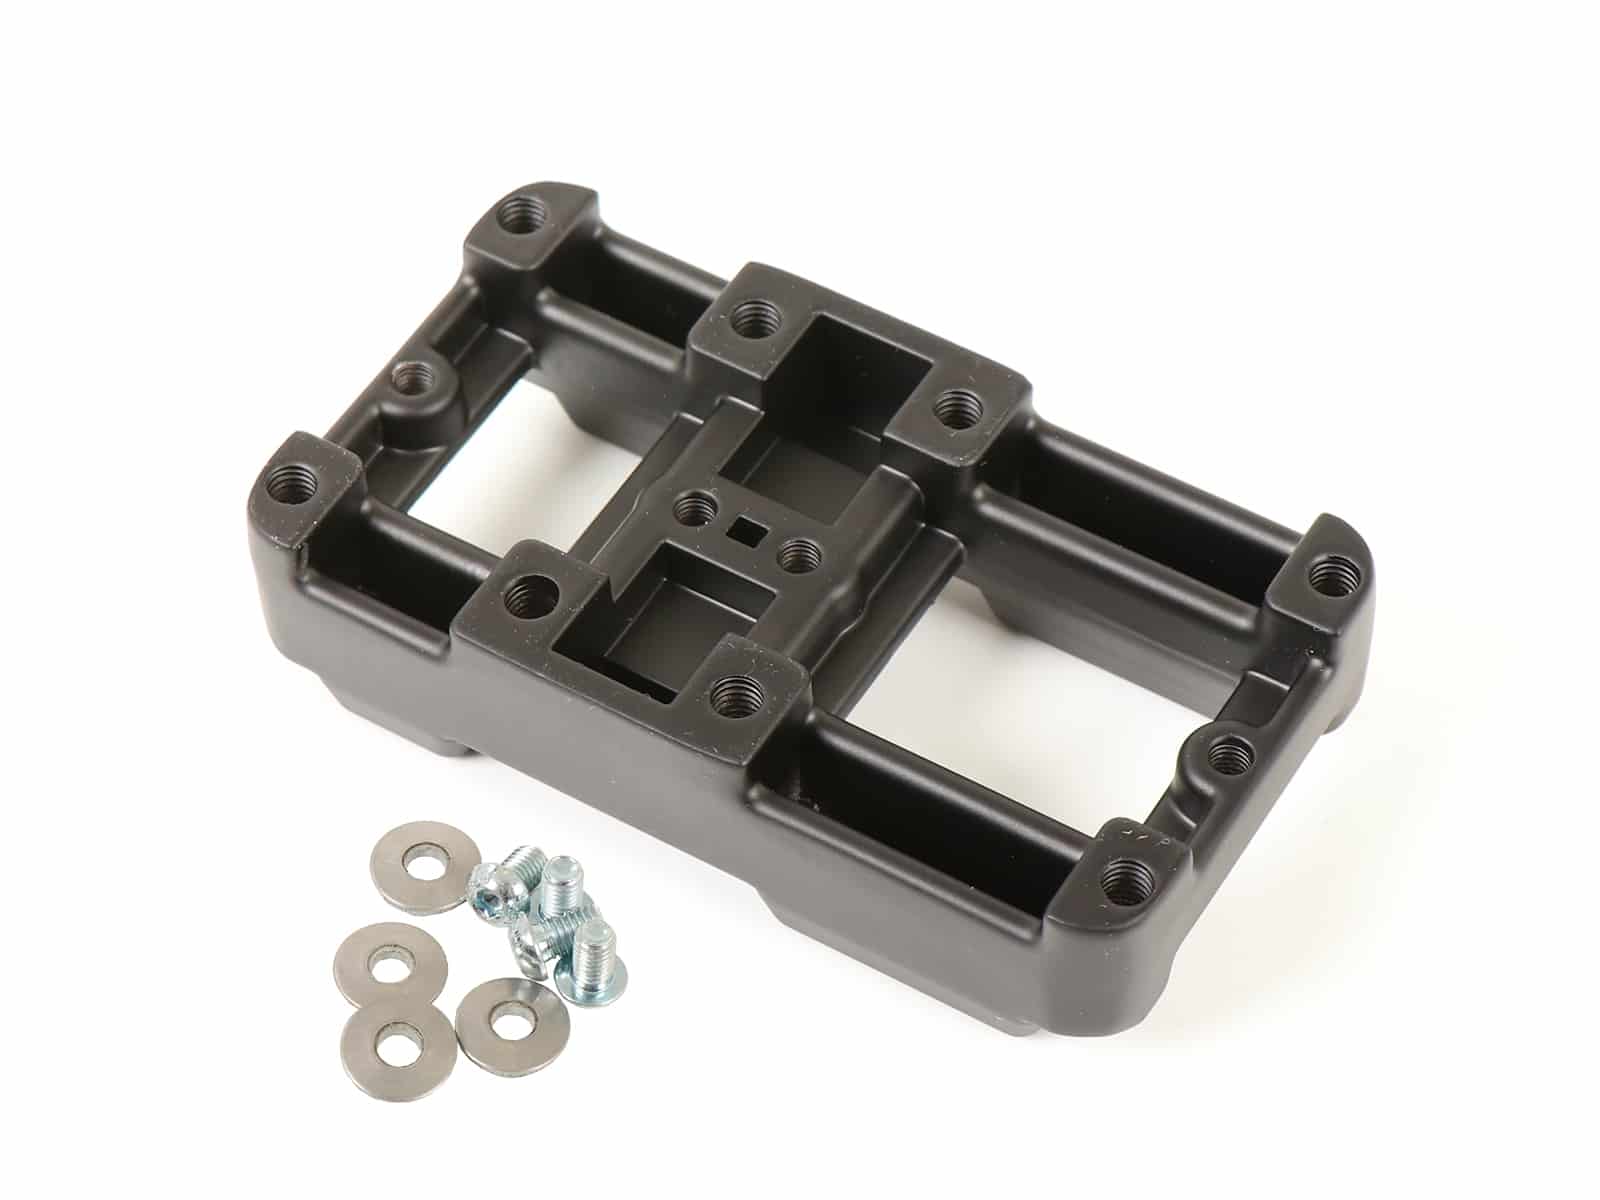 Universal mounting bracket for Xplorer boxes for fuel canister or water bottle